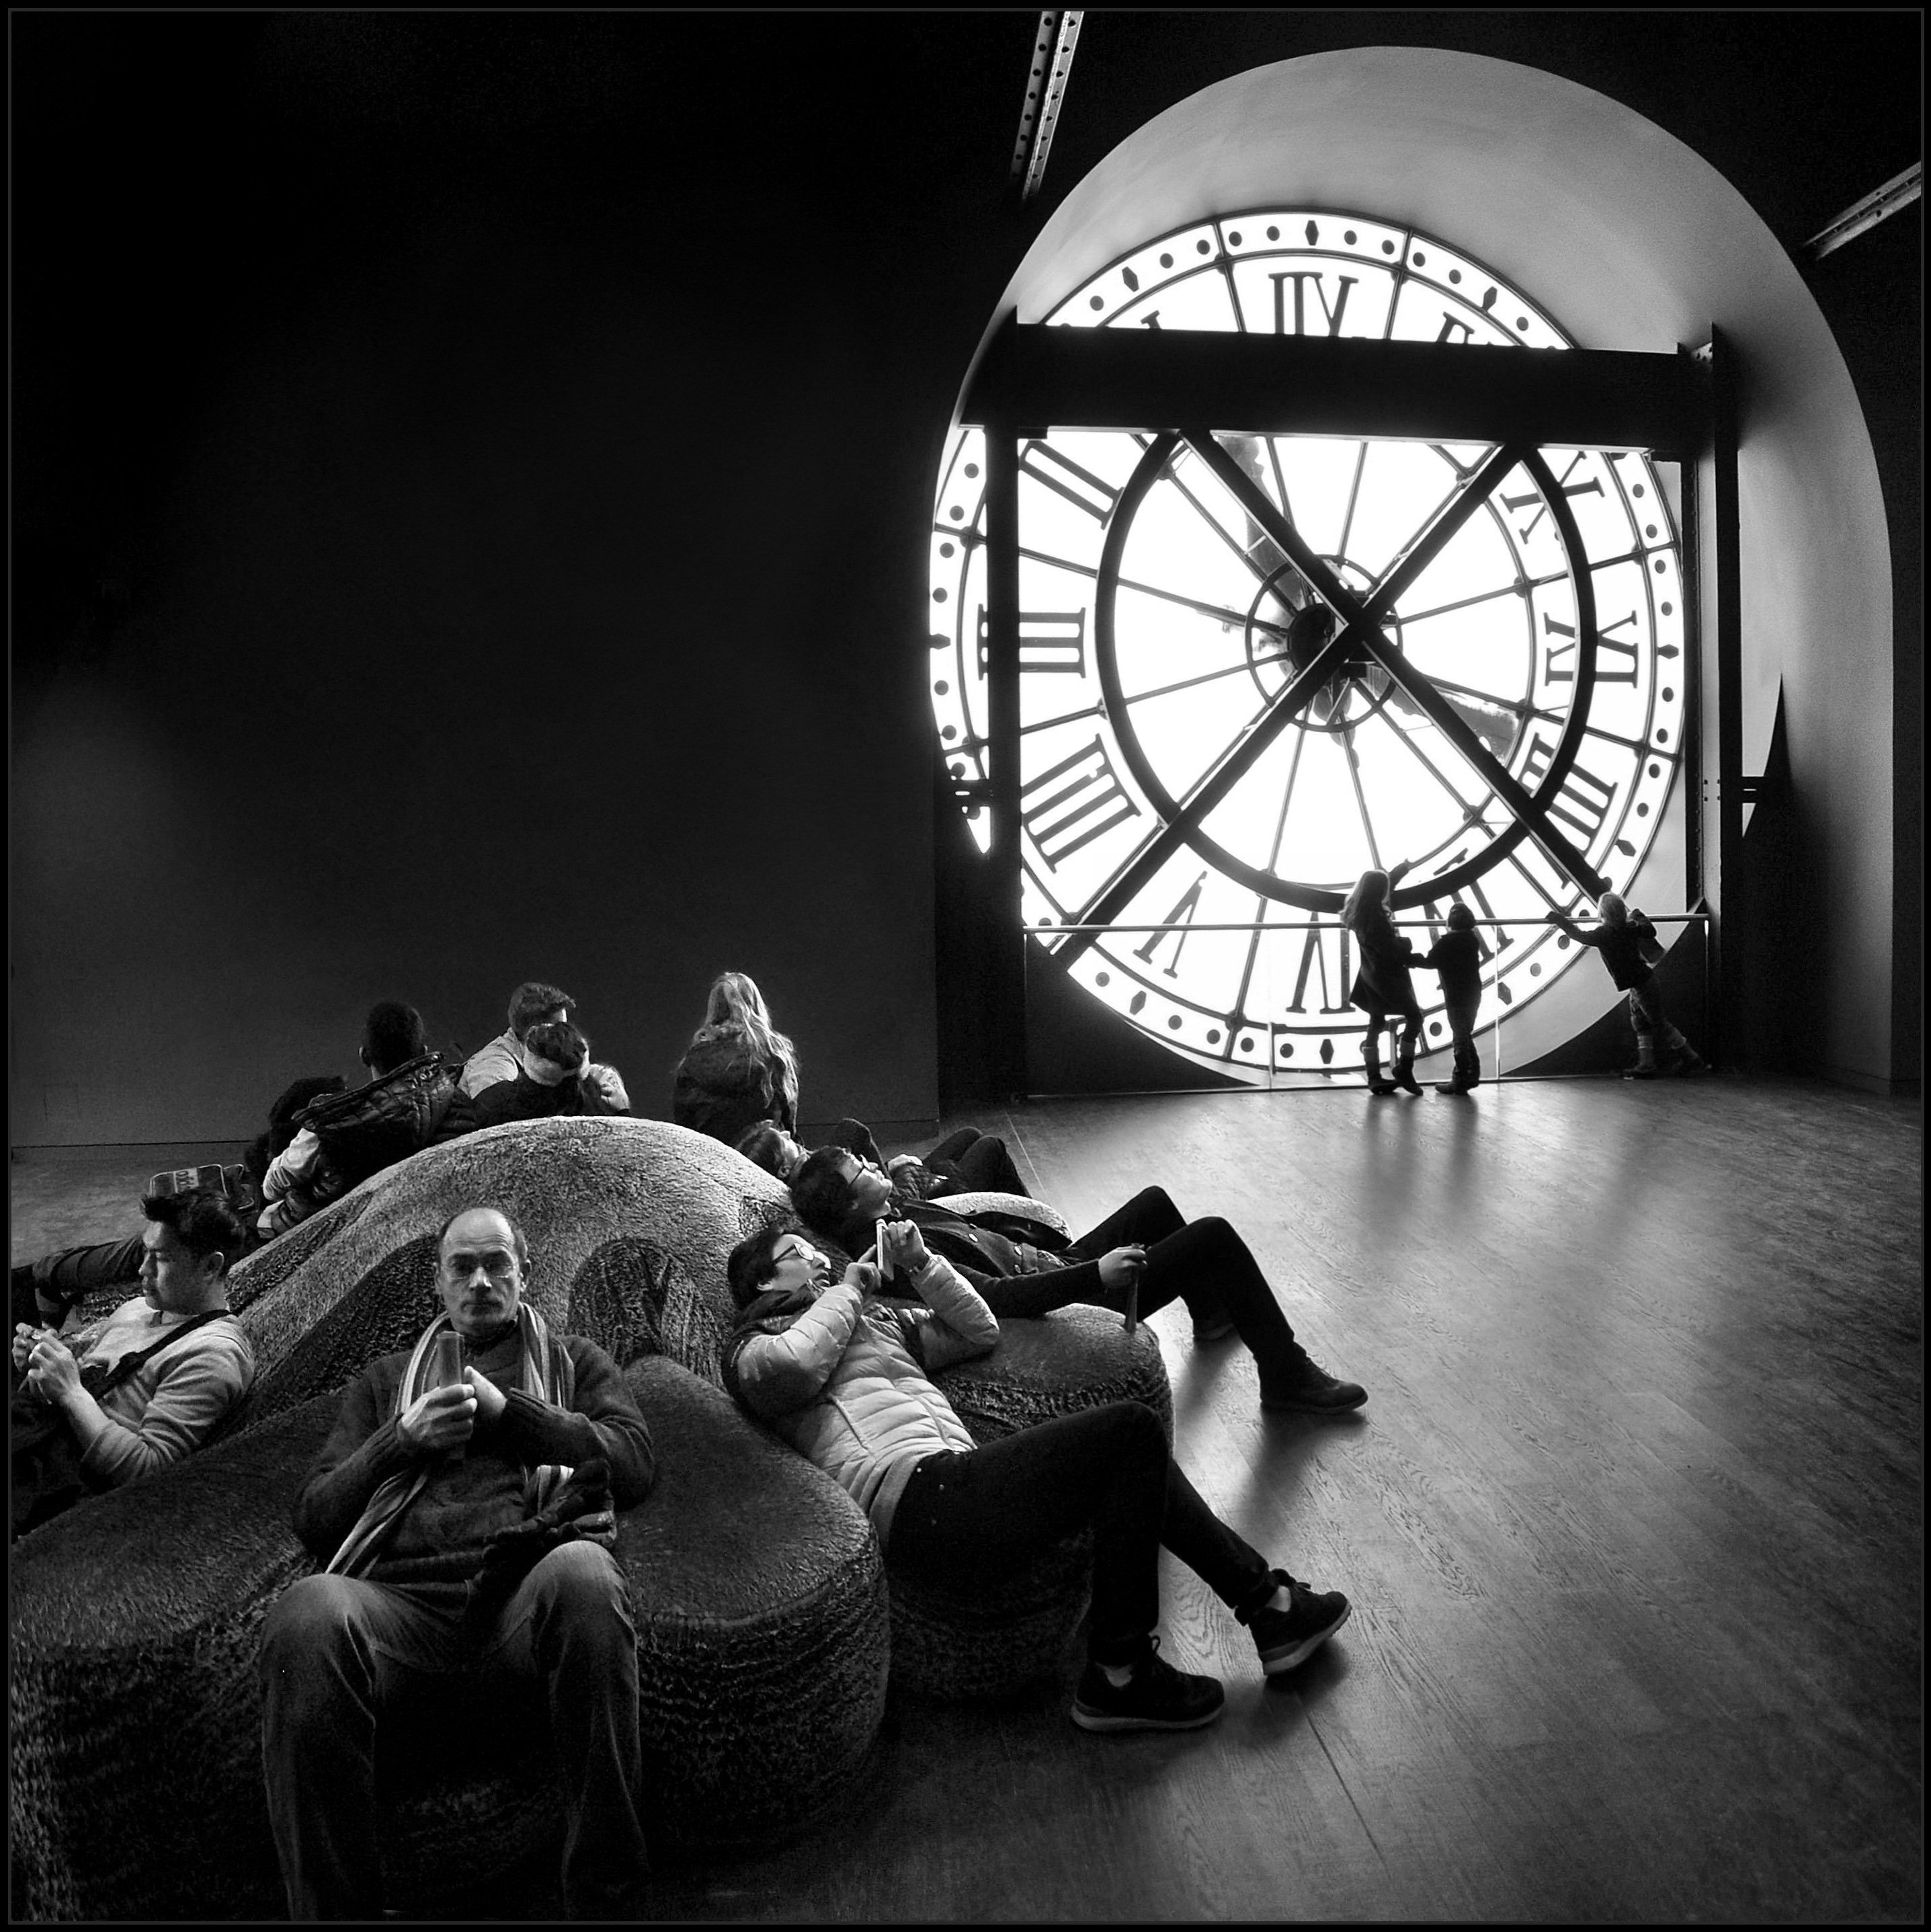 city, archtecture, interior, clock, time, people, rest, hall, iron, museum, orsay, paris,, Endegor